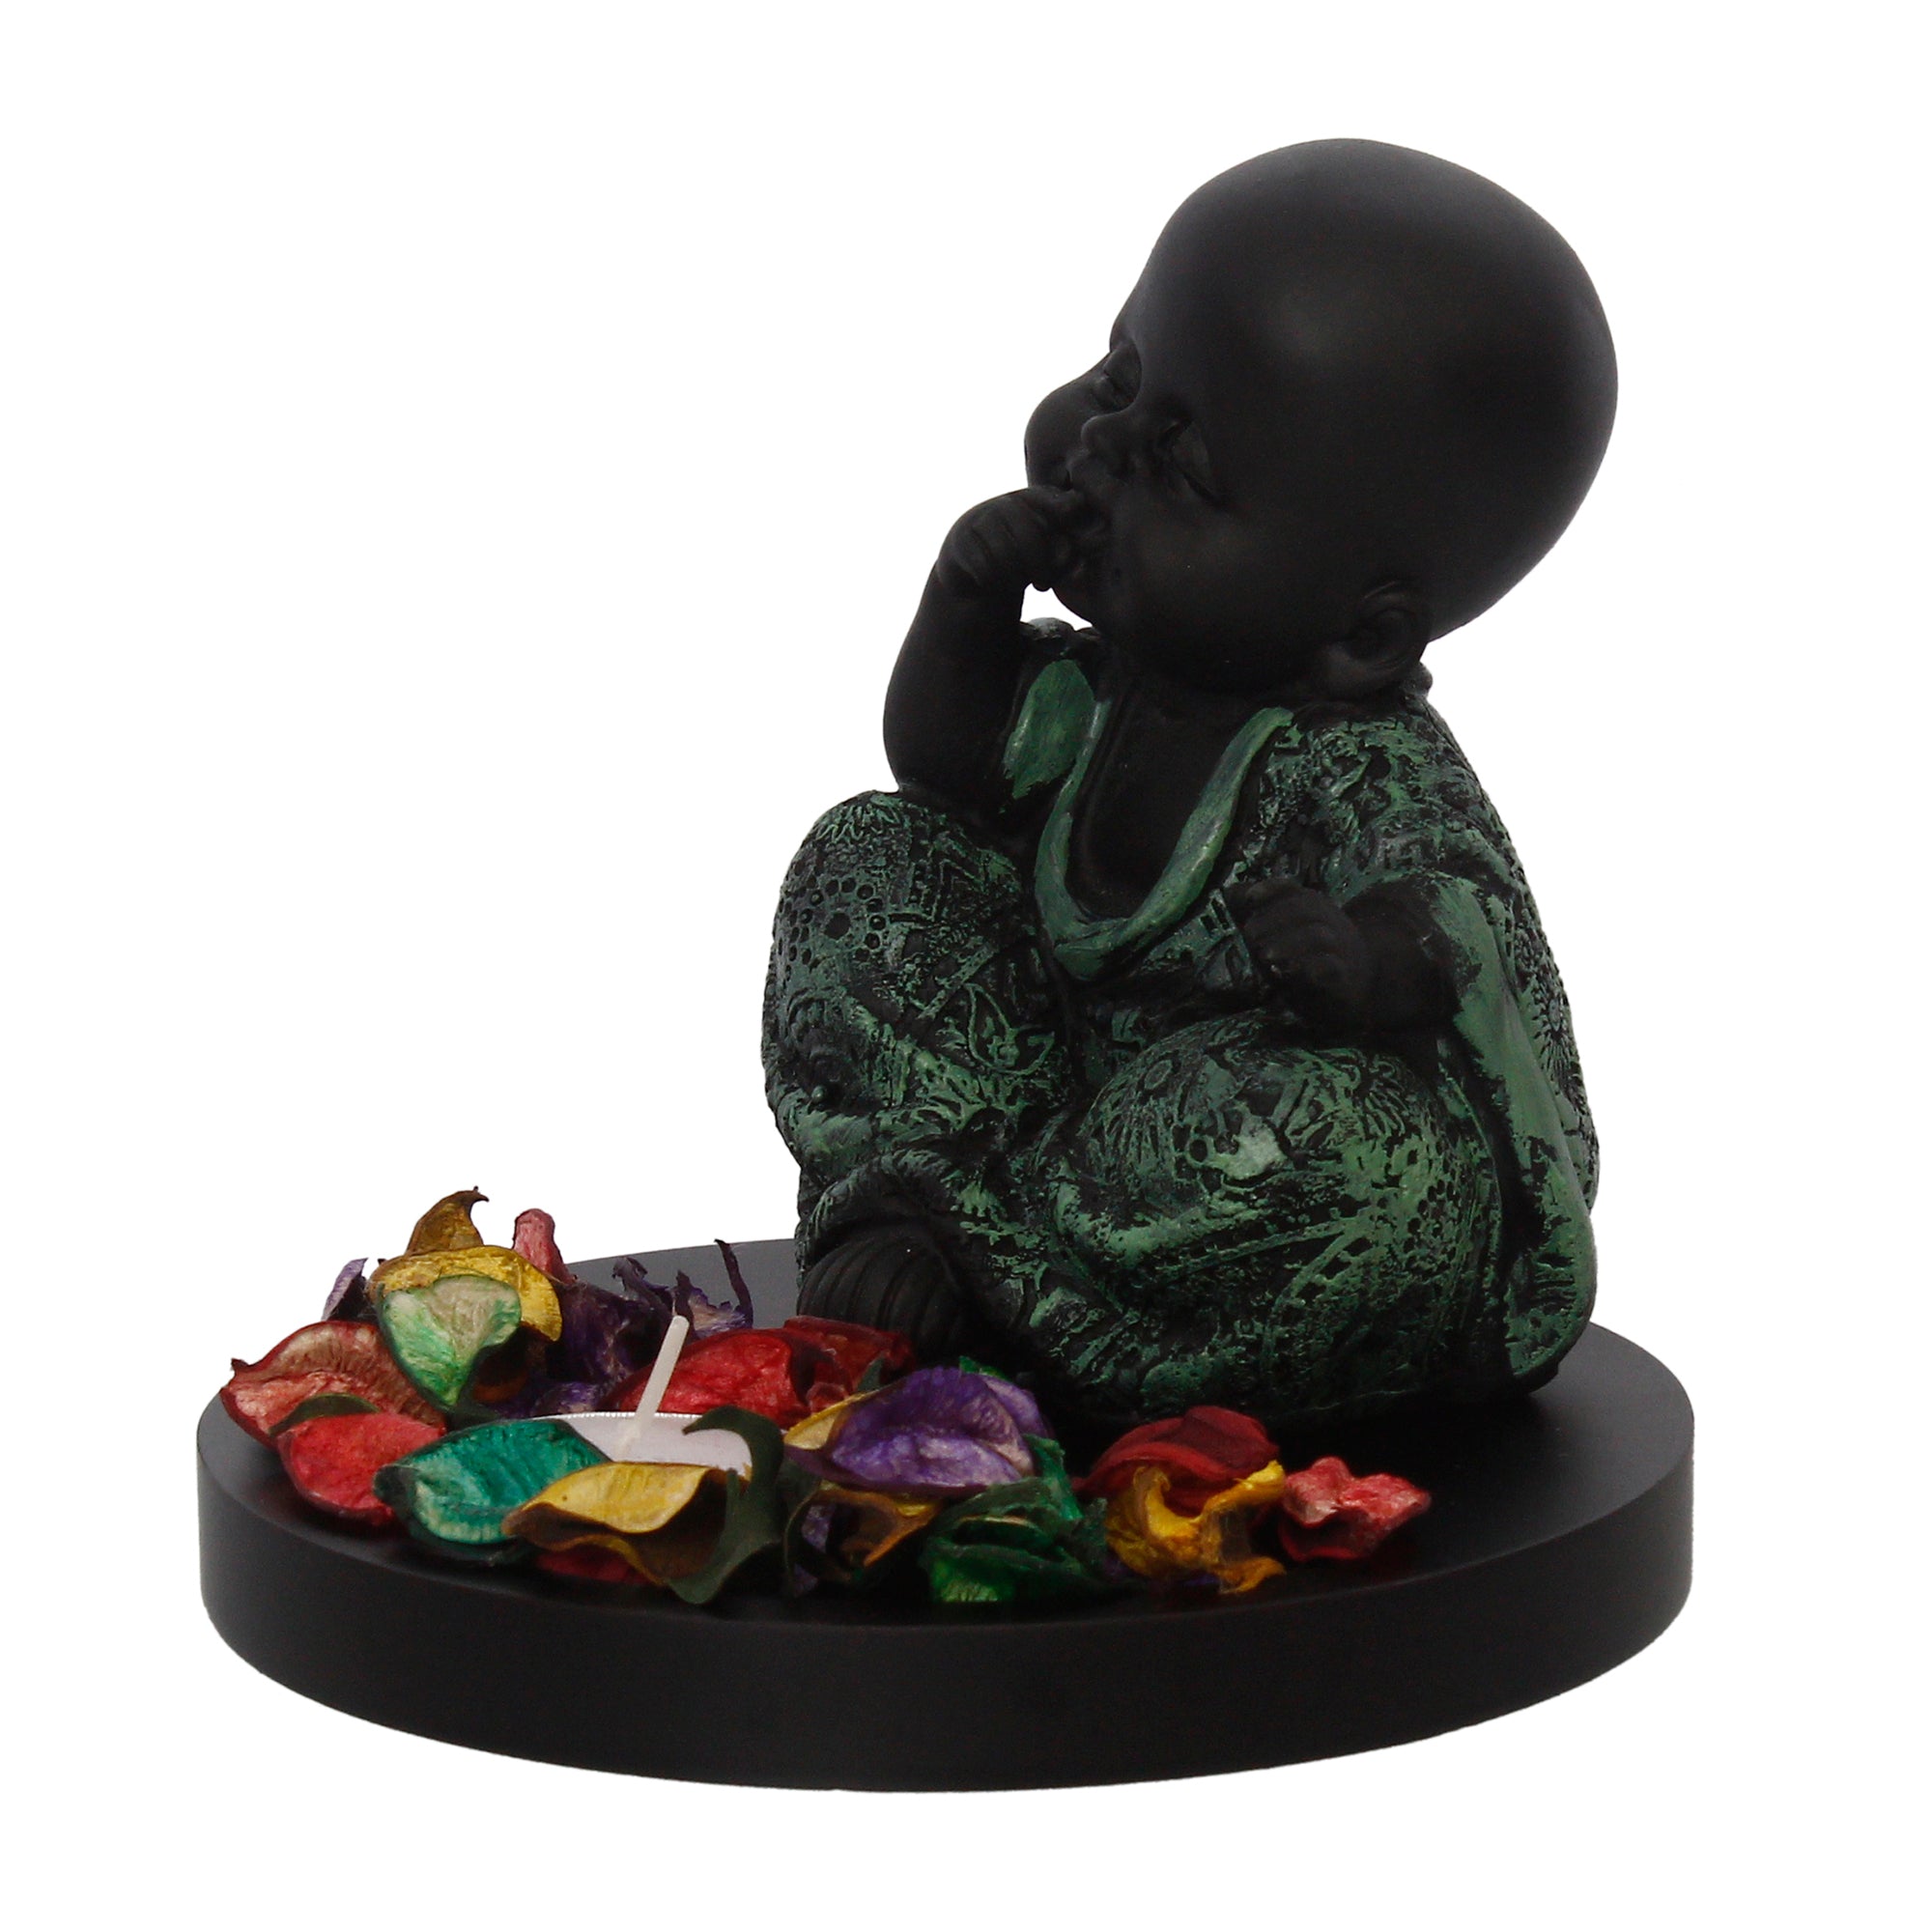 Decorative Smiling Green Monk Buddha with Wooden Base, Fragranced Petals and Tealight 4